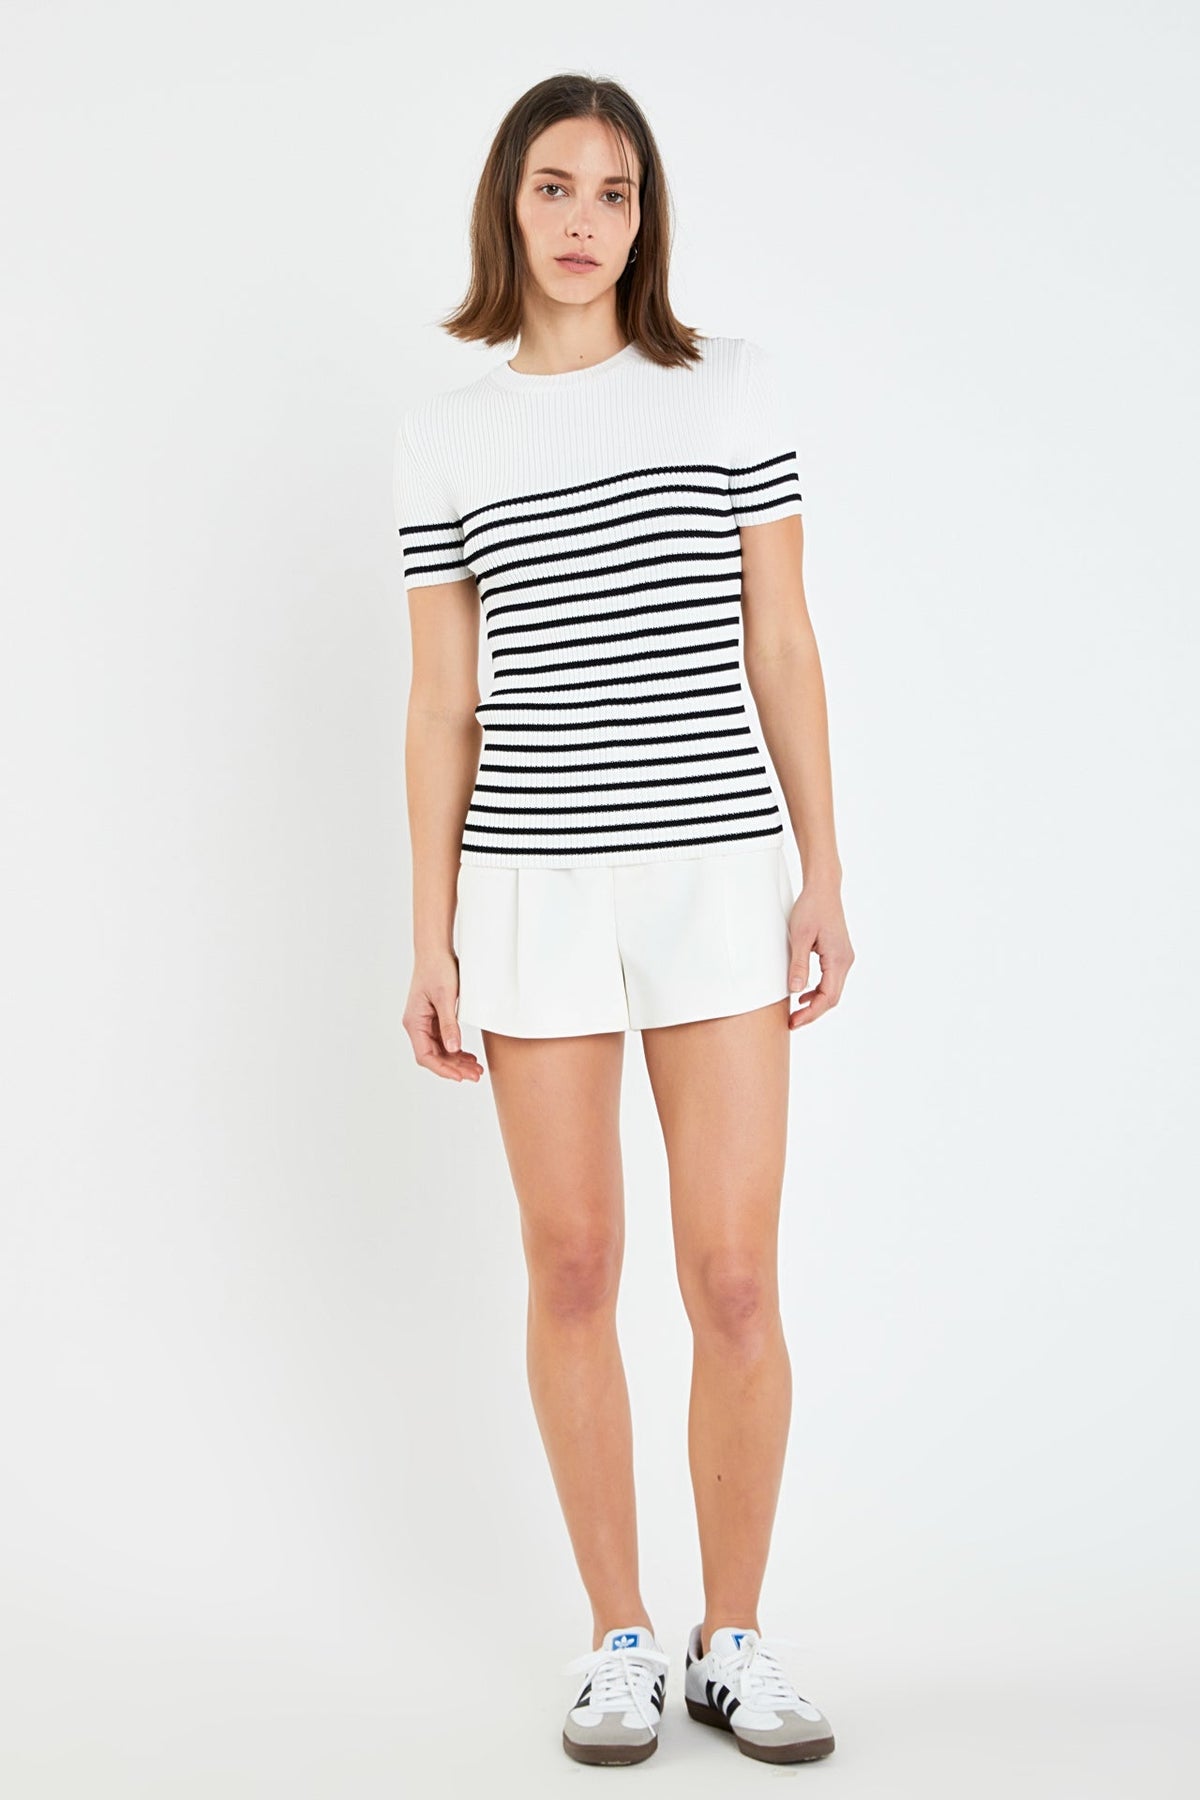 ENGLISH FACTORY - Stripe Fitted Knit Top - TOPS available at Objectrare